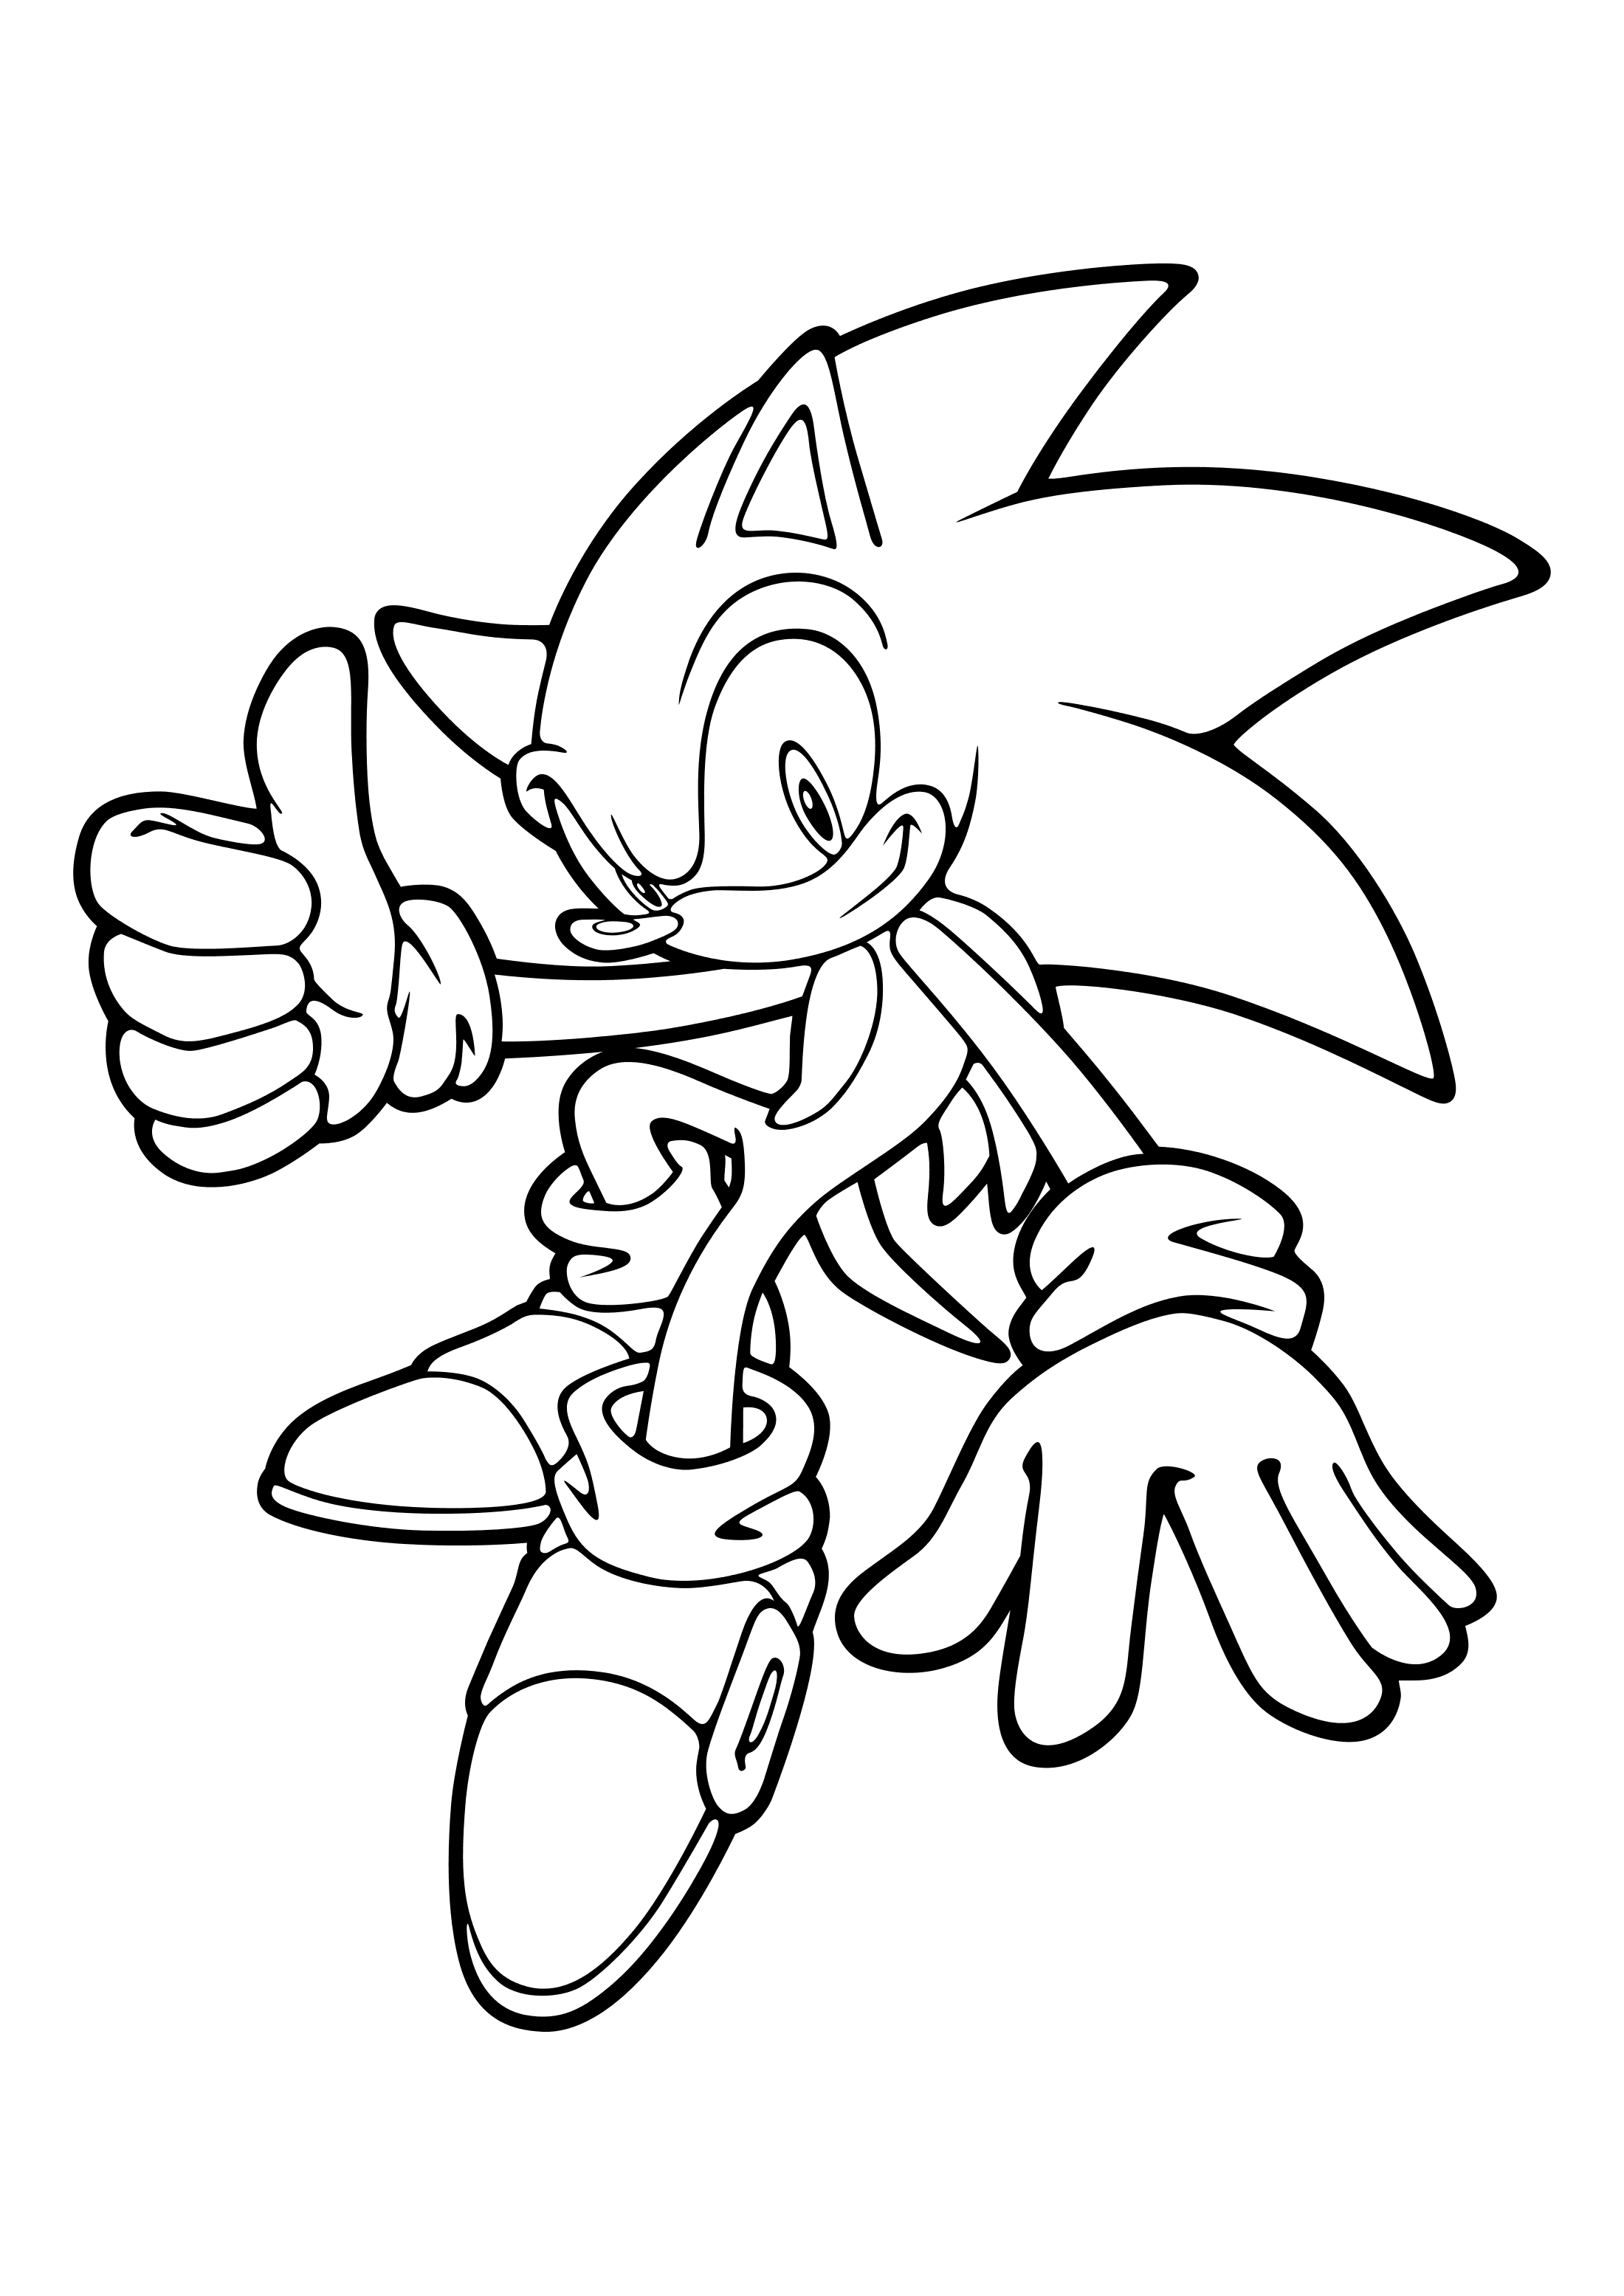 Coloring page Sonic Shows that everything is fine